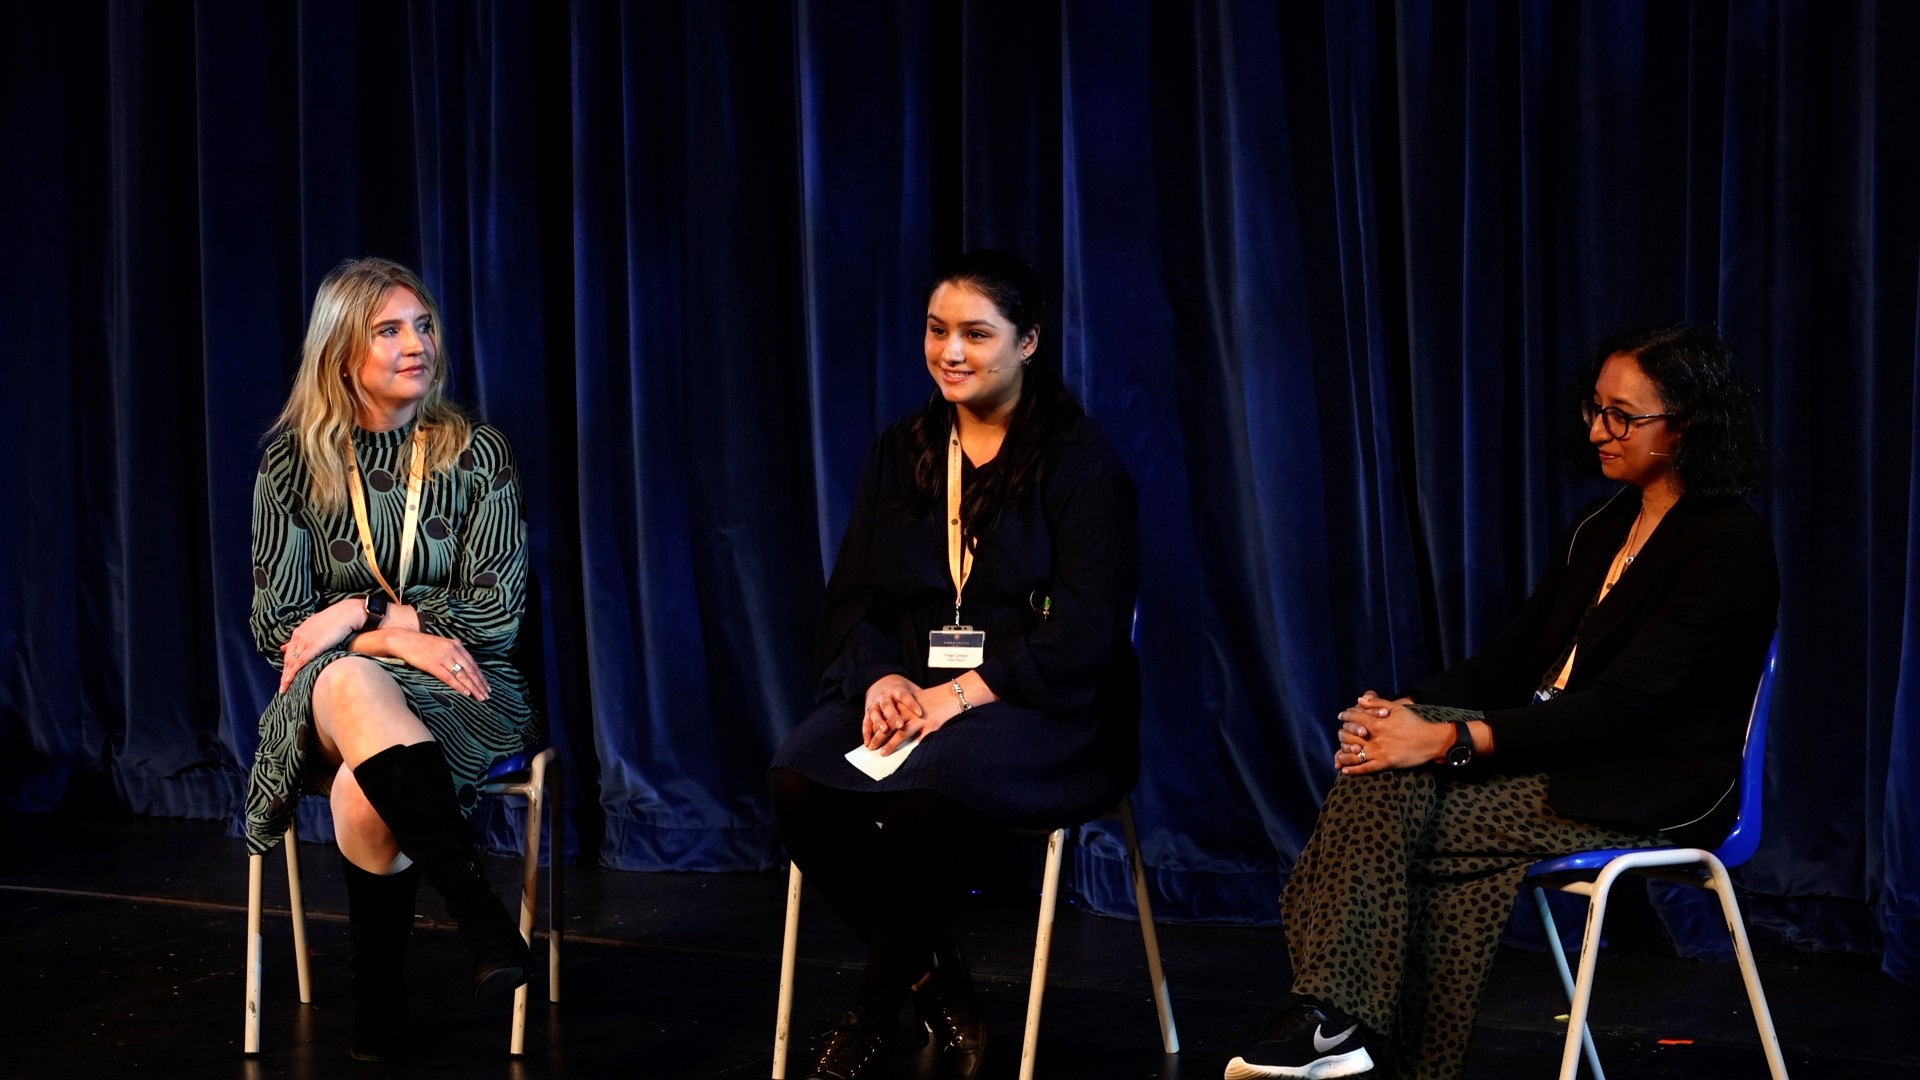 Women in Tech Panel encourages Year 9 girls to aim high 